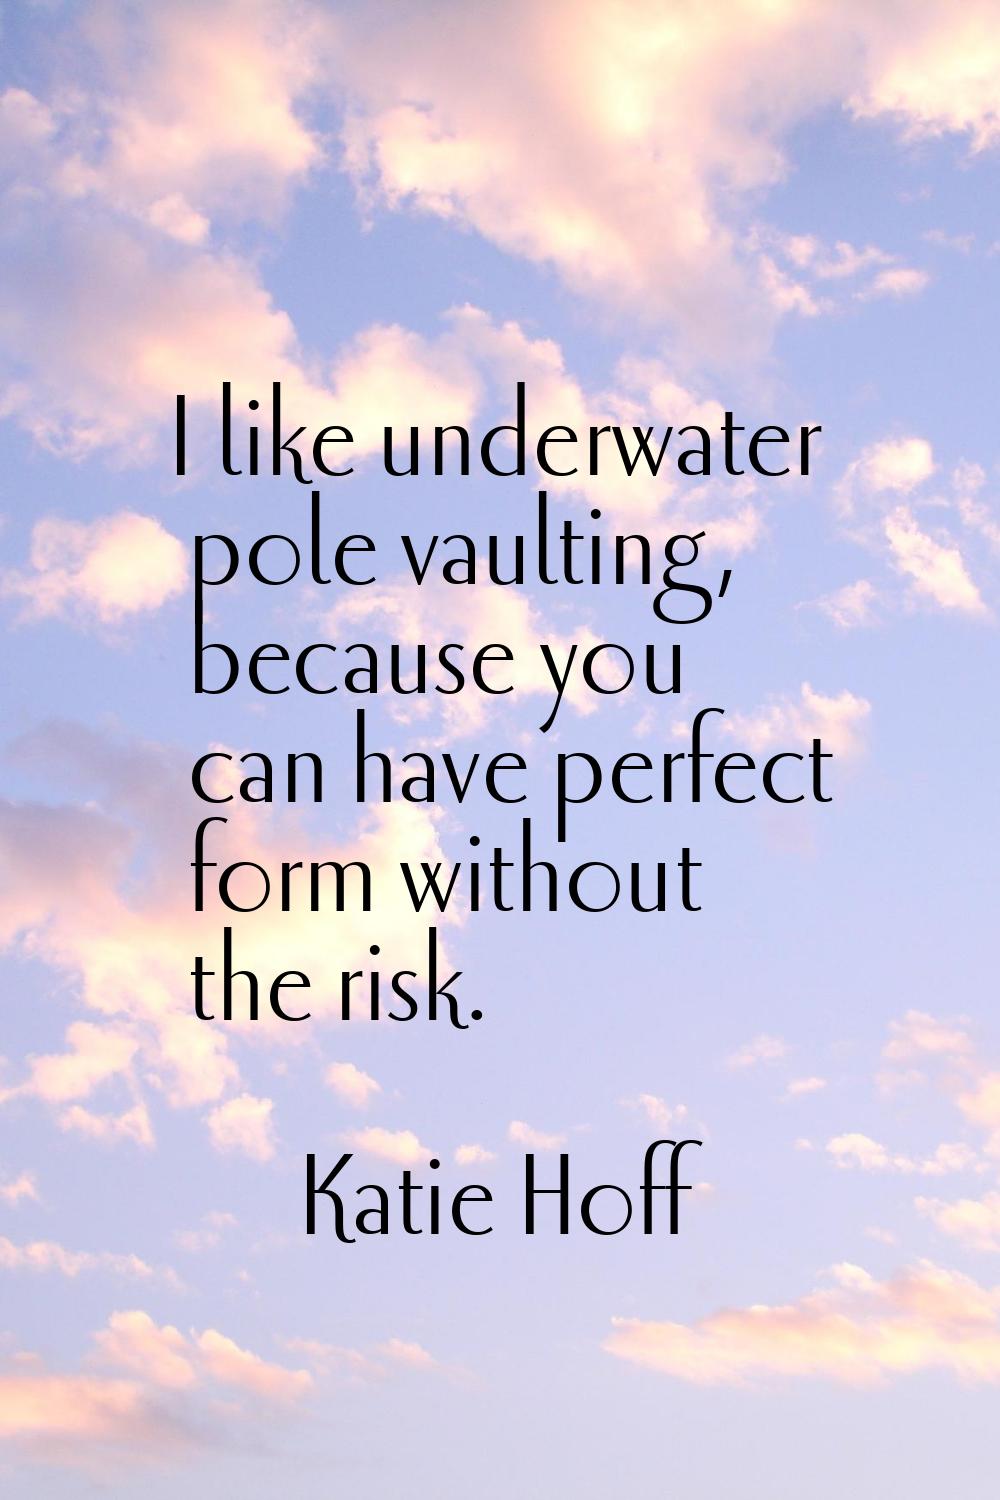 I like underwater pole vaulting, because you can have perfect form without the risk.